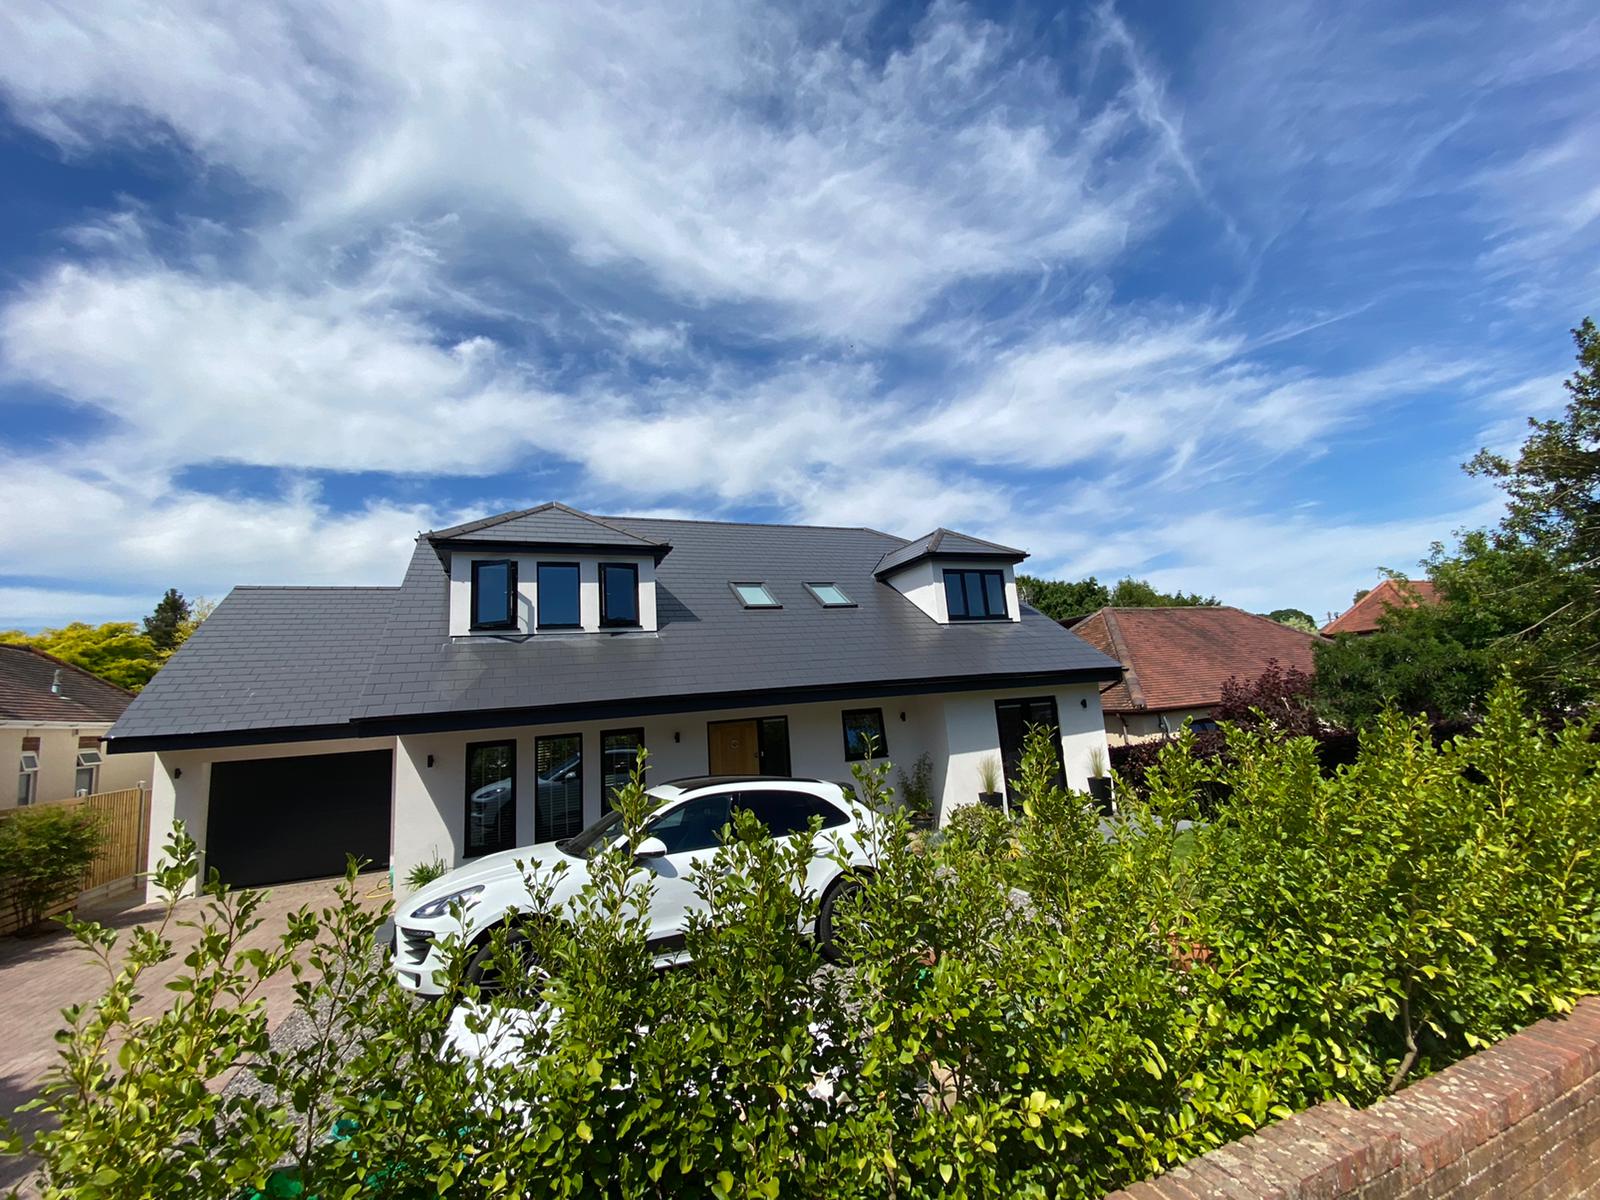 Exterior Shot of A House in Portsmouth - Building Contractors for Housing Associations